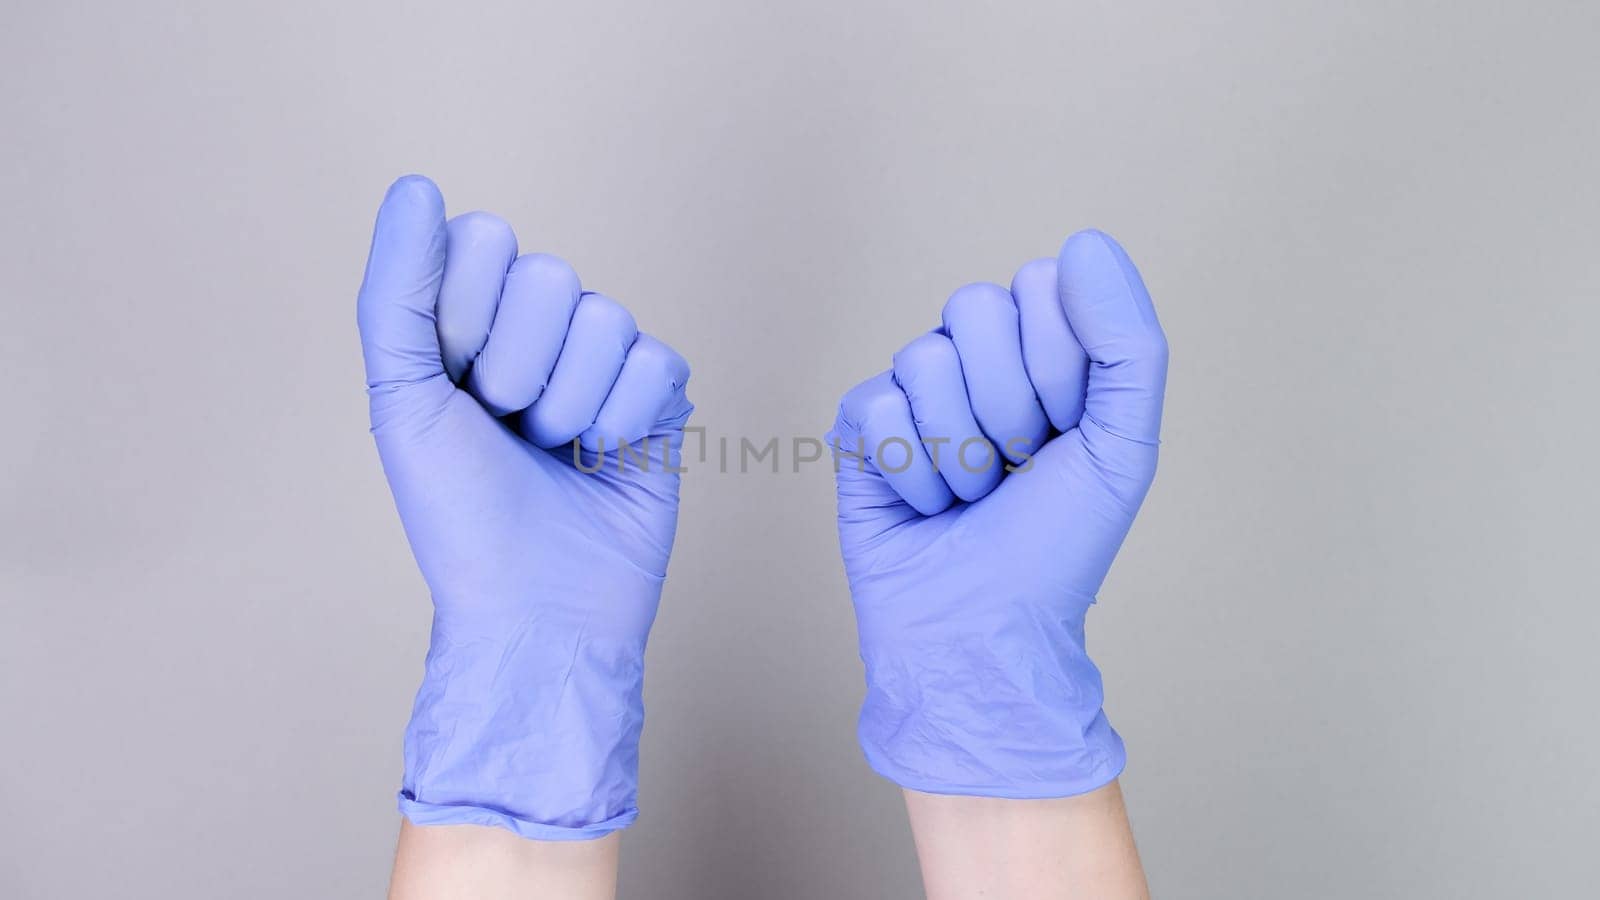 Hands in blue gloves of doctor or nurse over grey background with copy space. Medical gloves